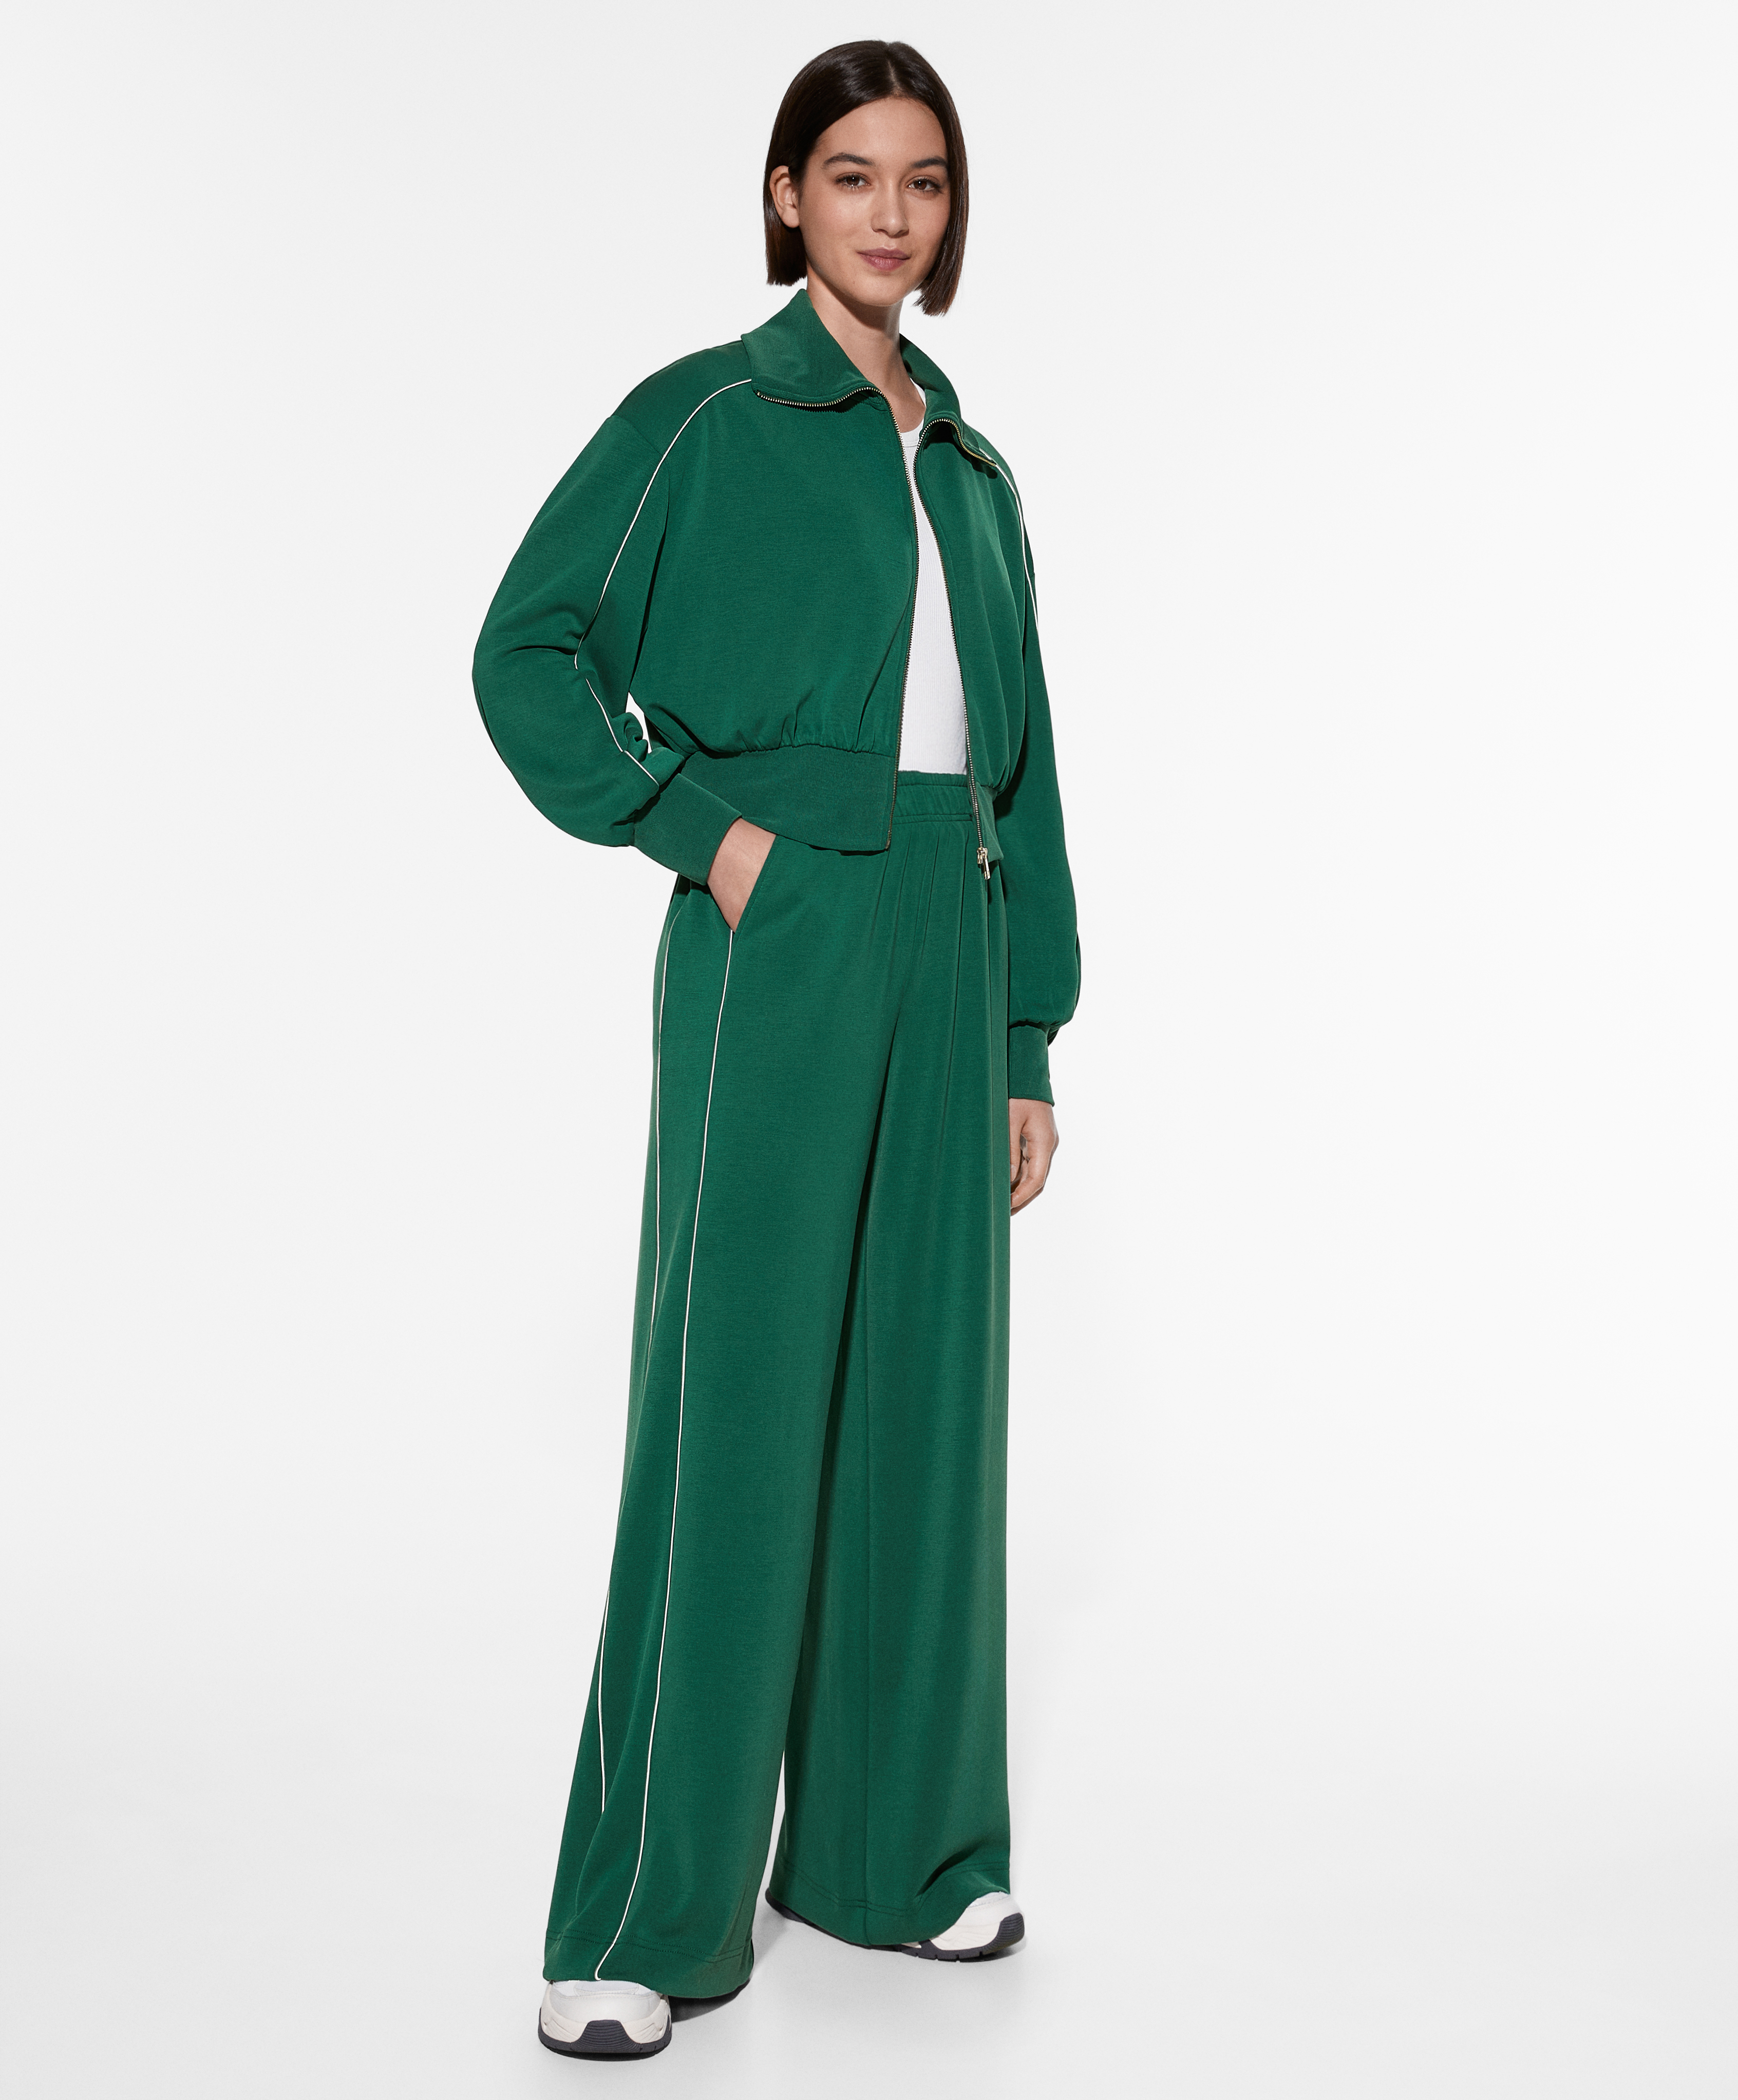 Green long total look with modal